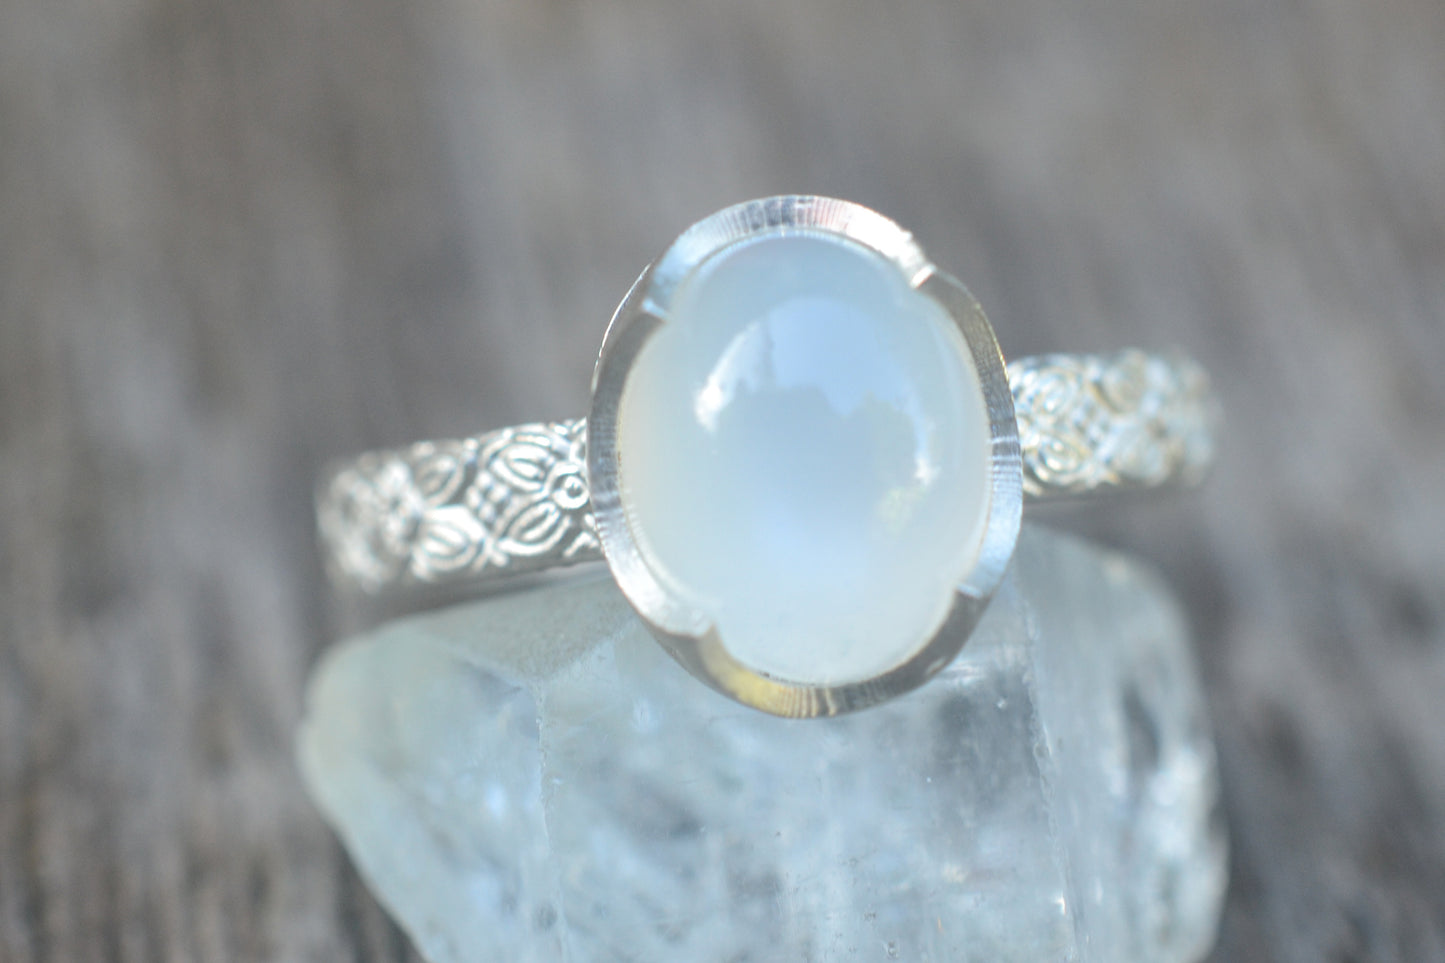 Floral Poesy Ring With White Moonstone Gem